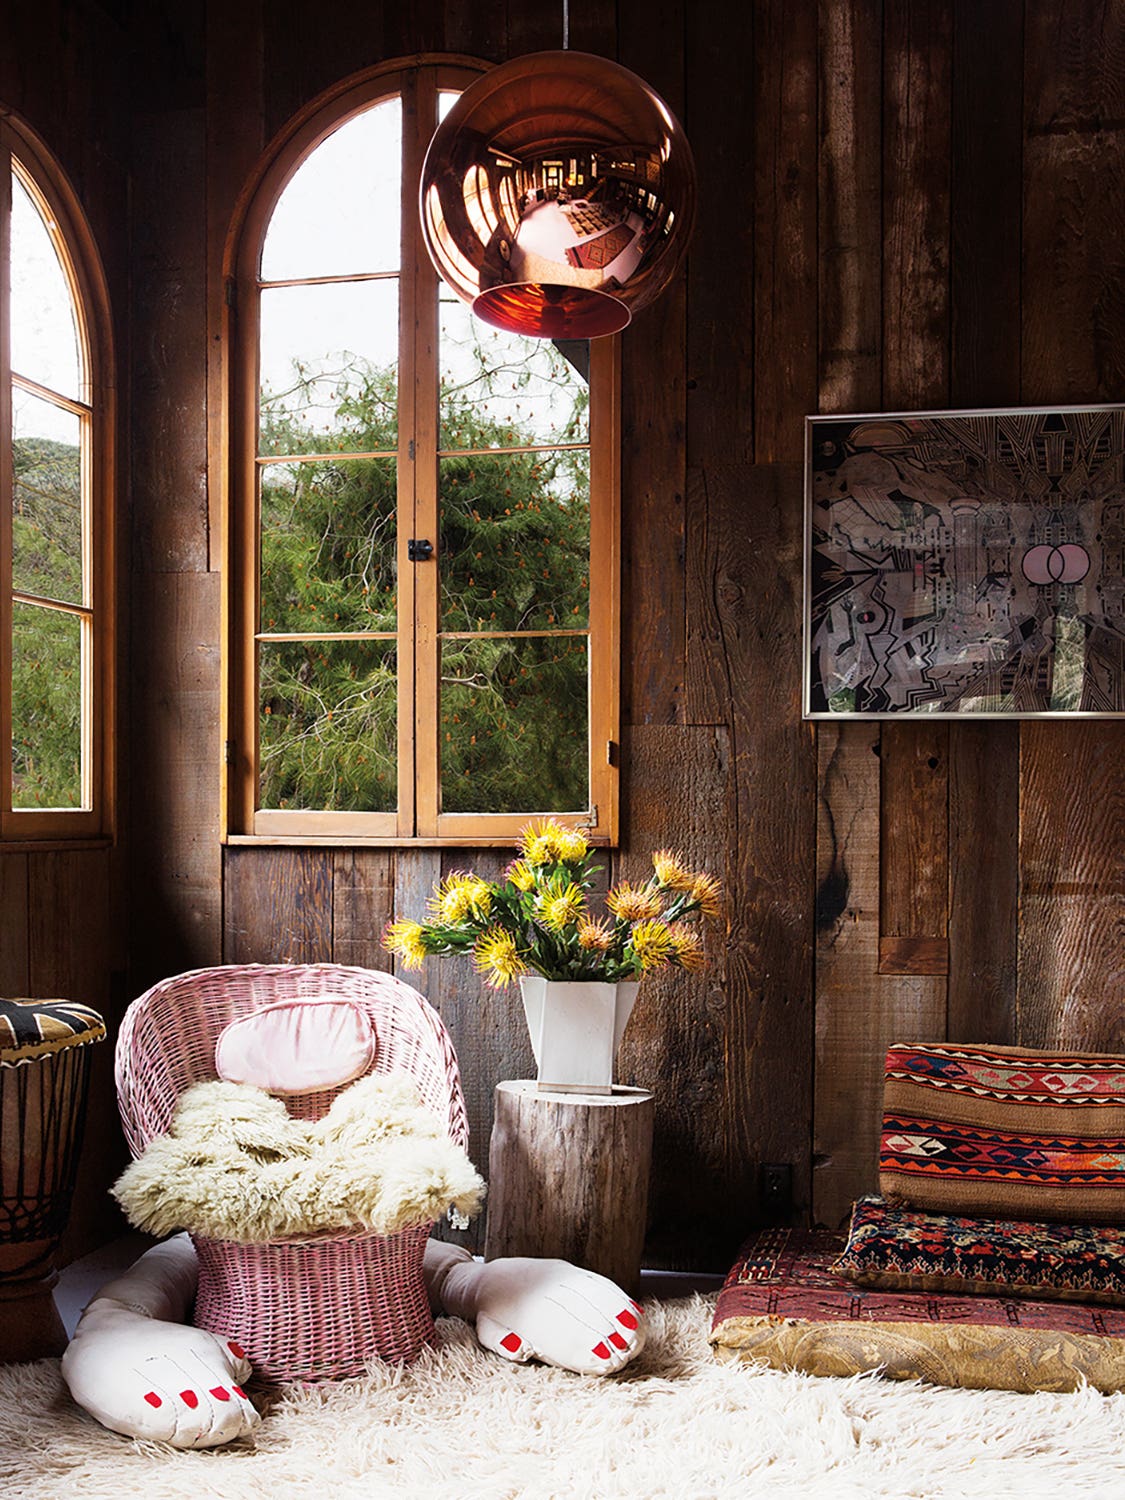 wood paneled room with pink wicker chair